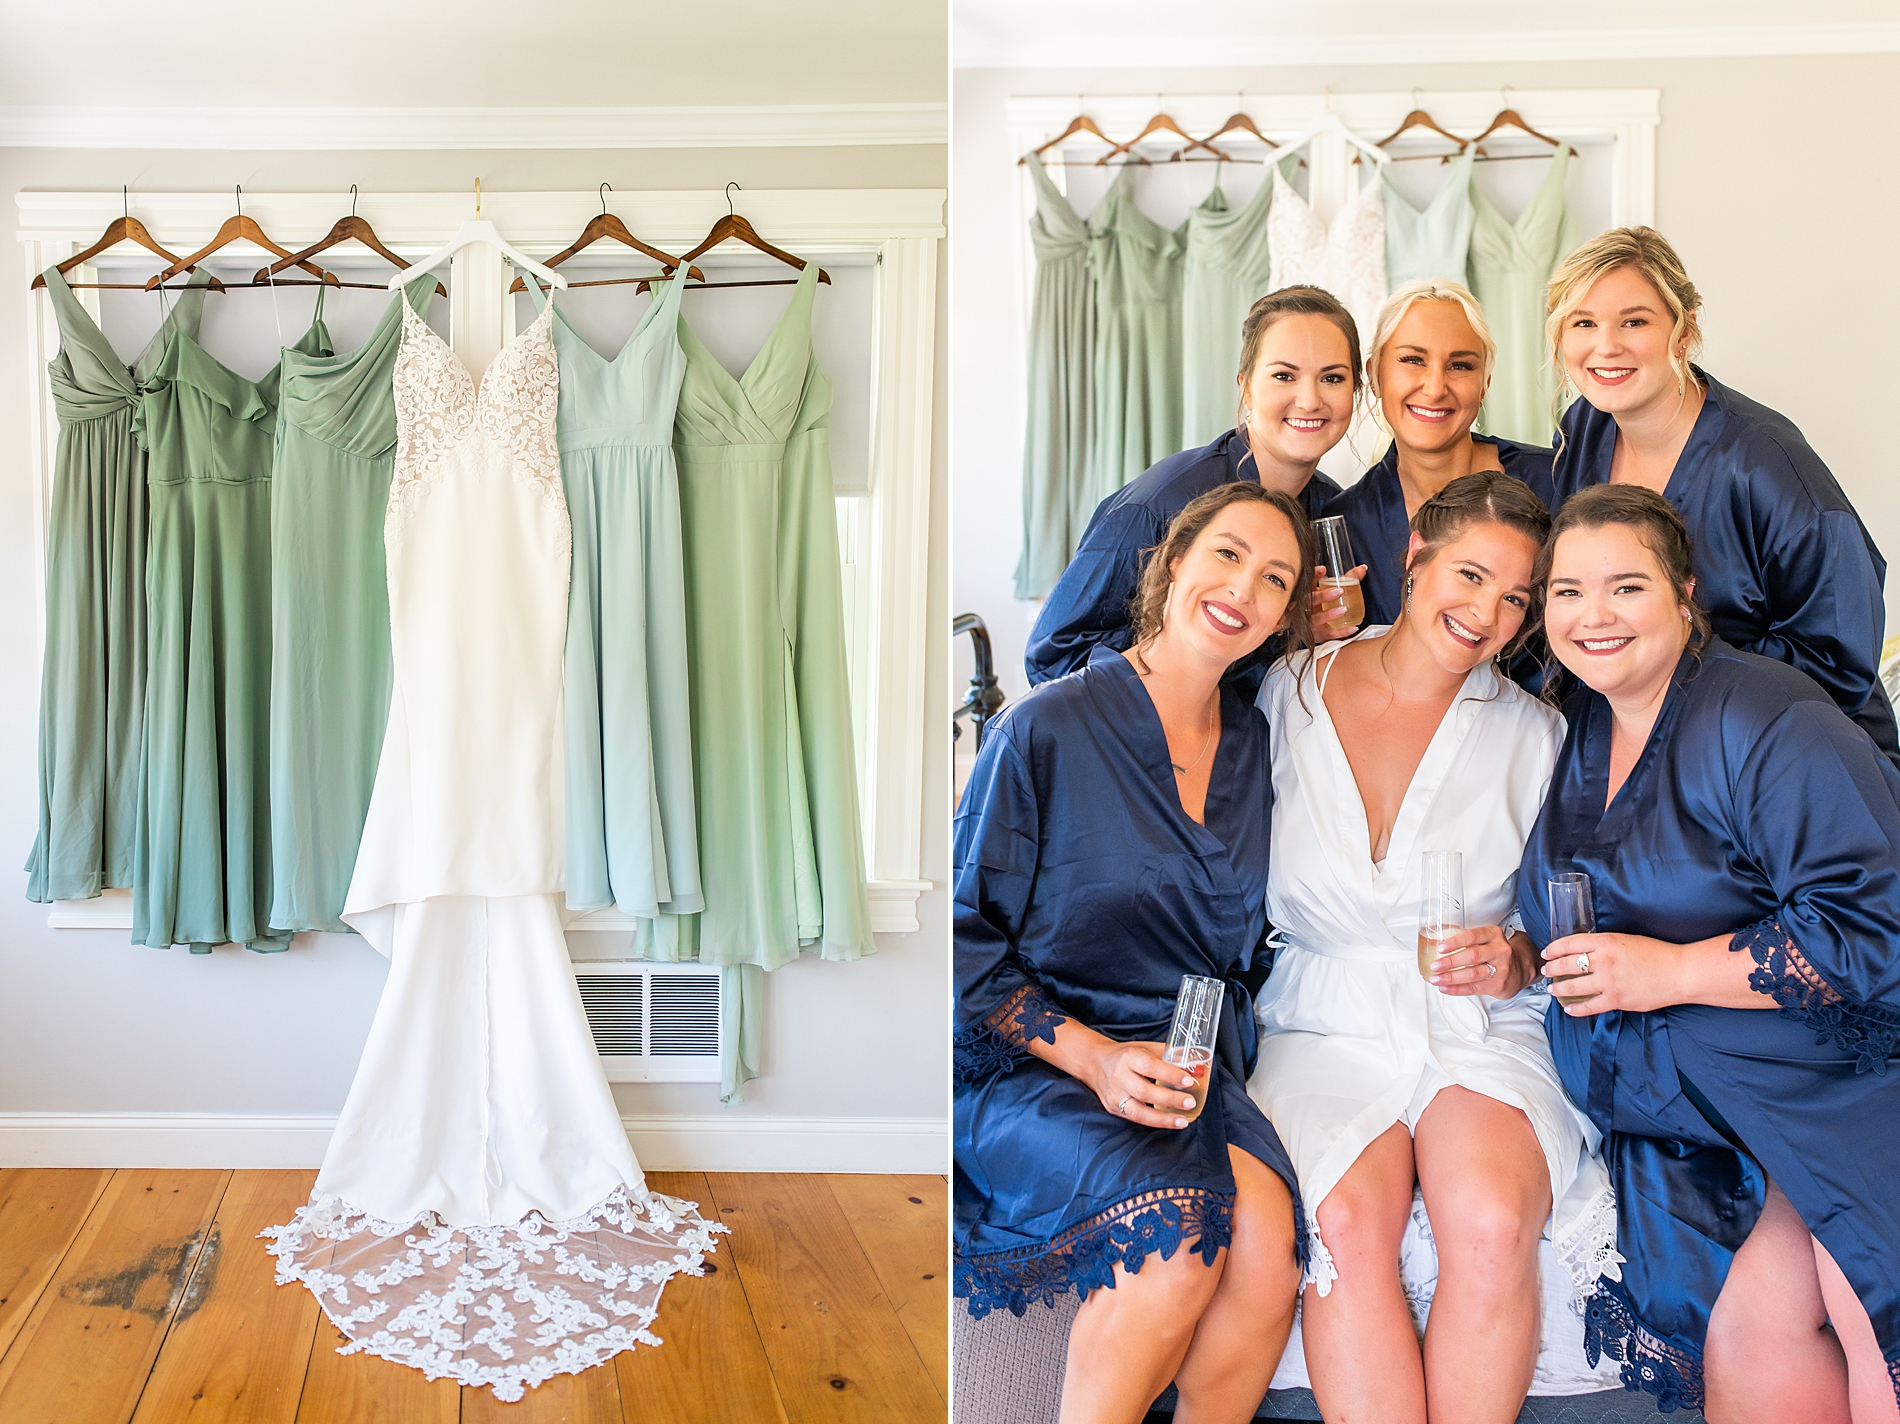 bridesmaids getting ready in matching navy robes